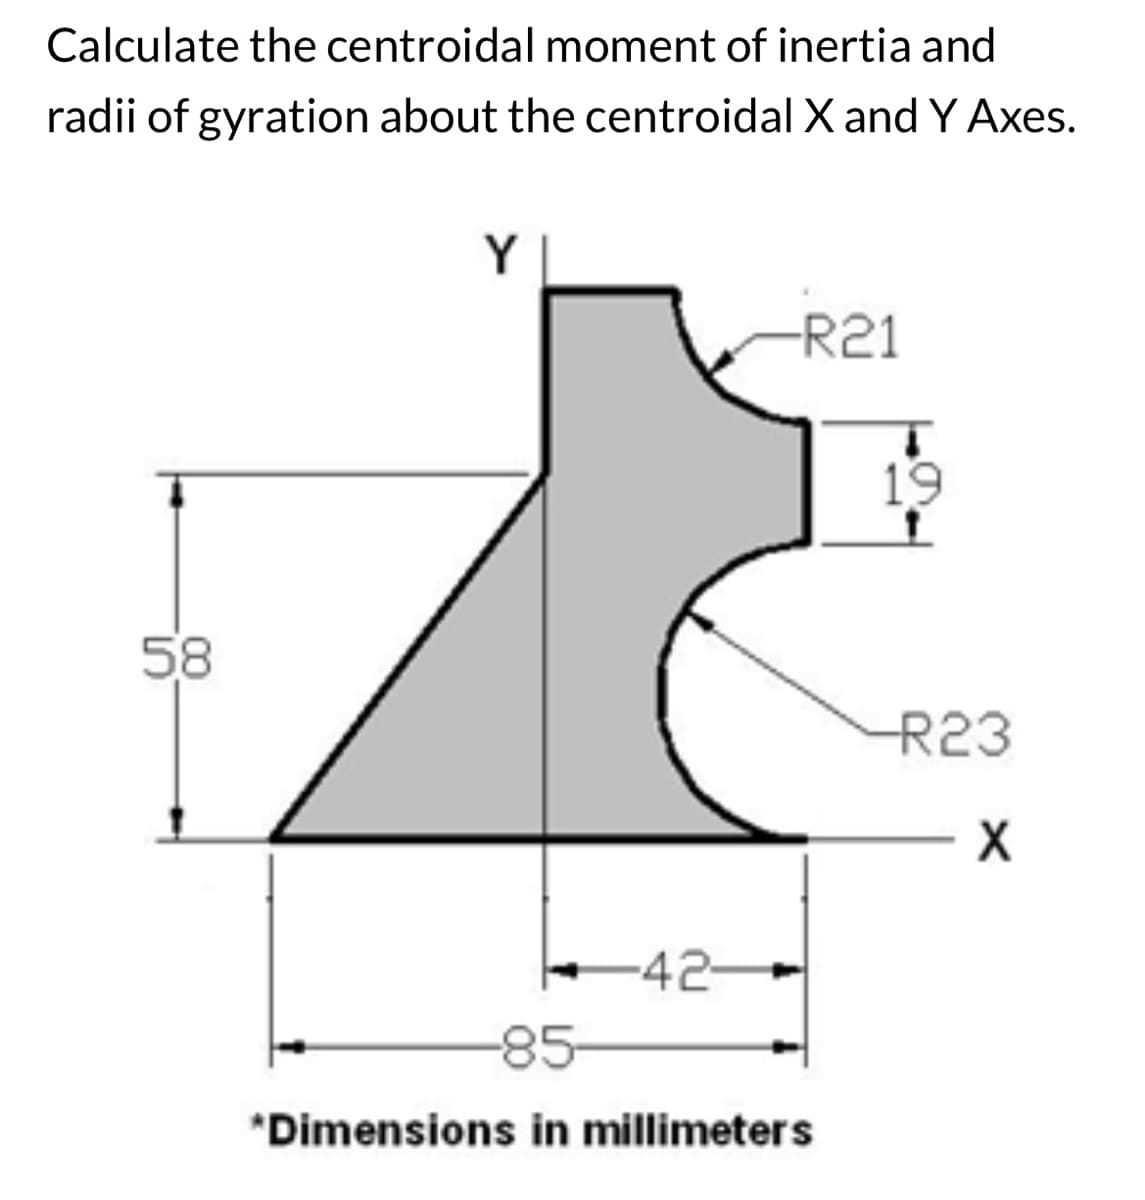 Calculate the centroidal moment of inertia and
radii of gyration about the centroidal X and Y Axes.
58
Y
-42-
-R21
-85
*Dimensions in millimeters
19
-R23
X